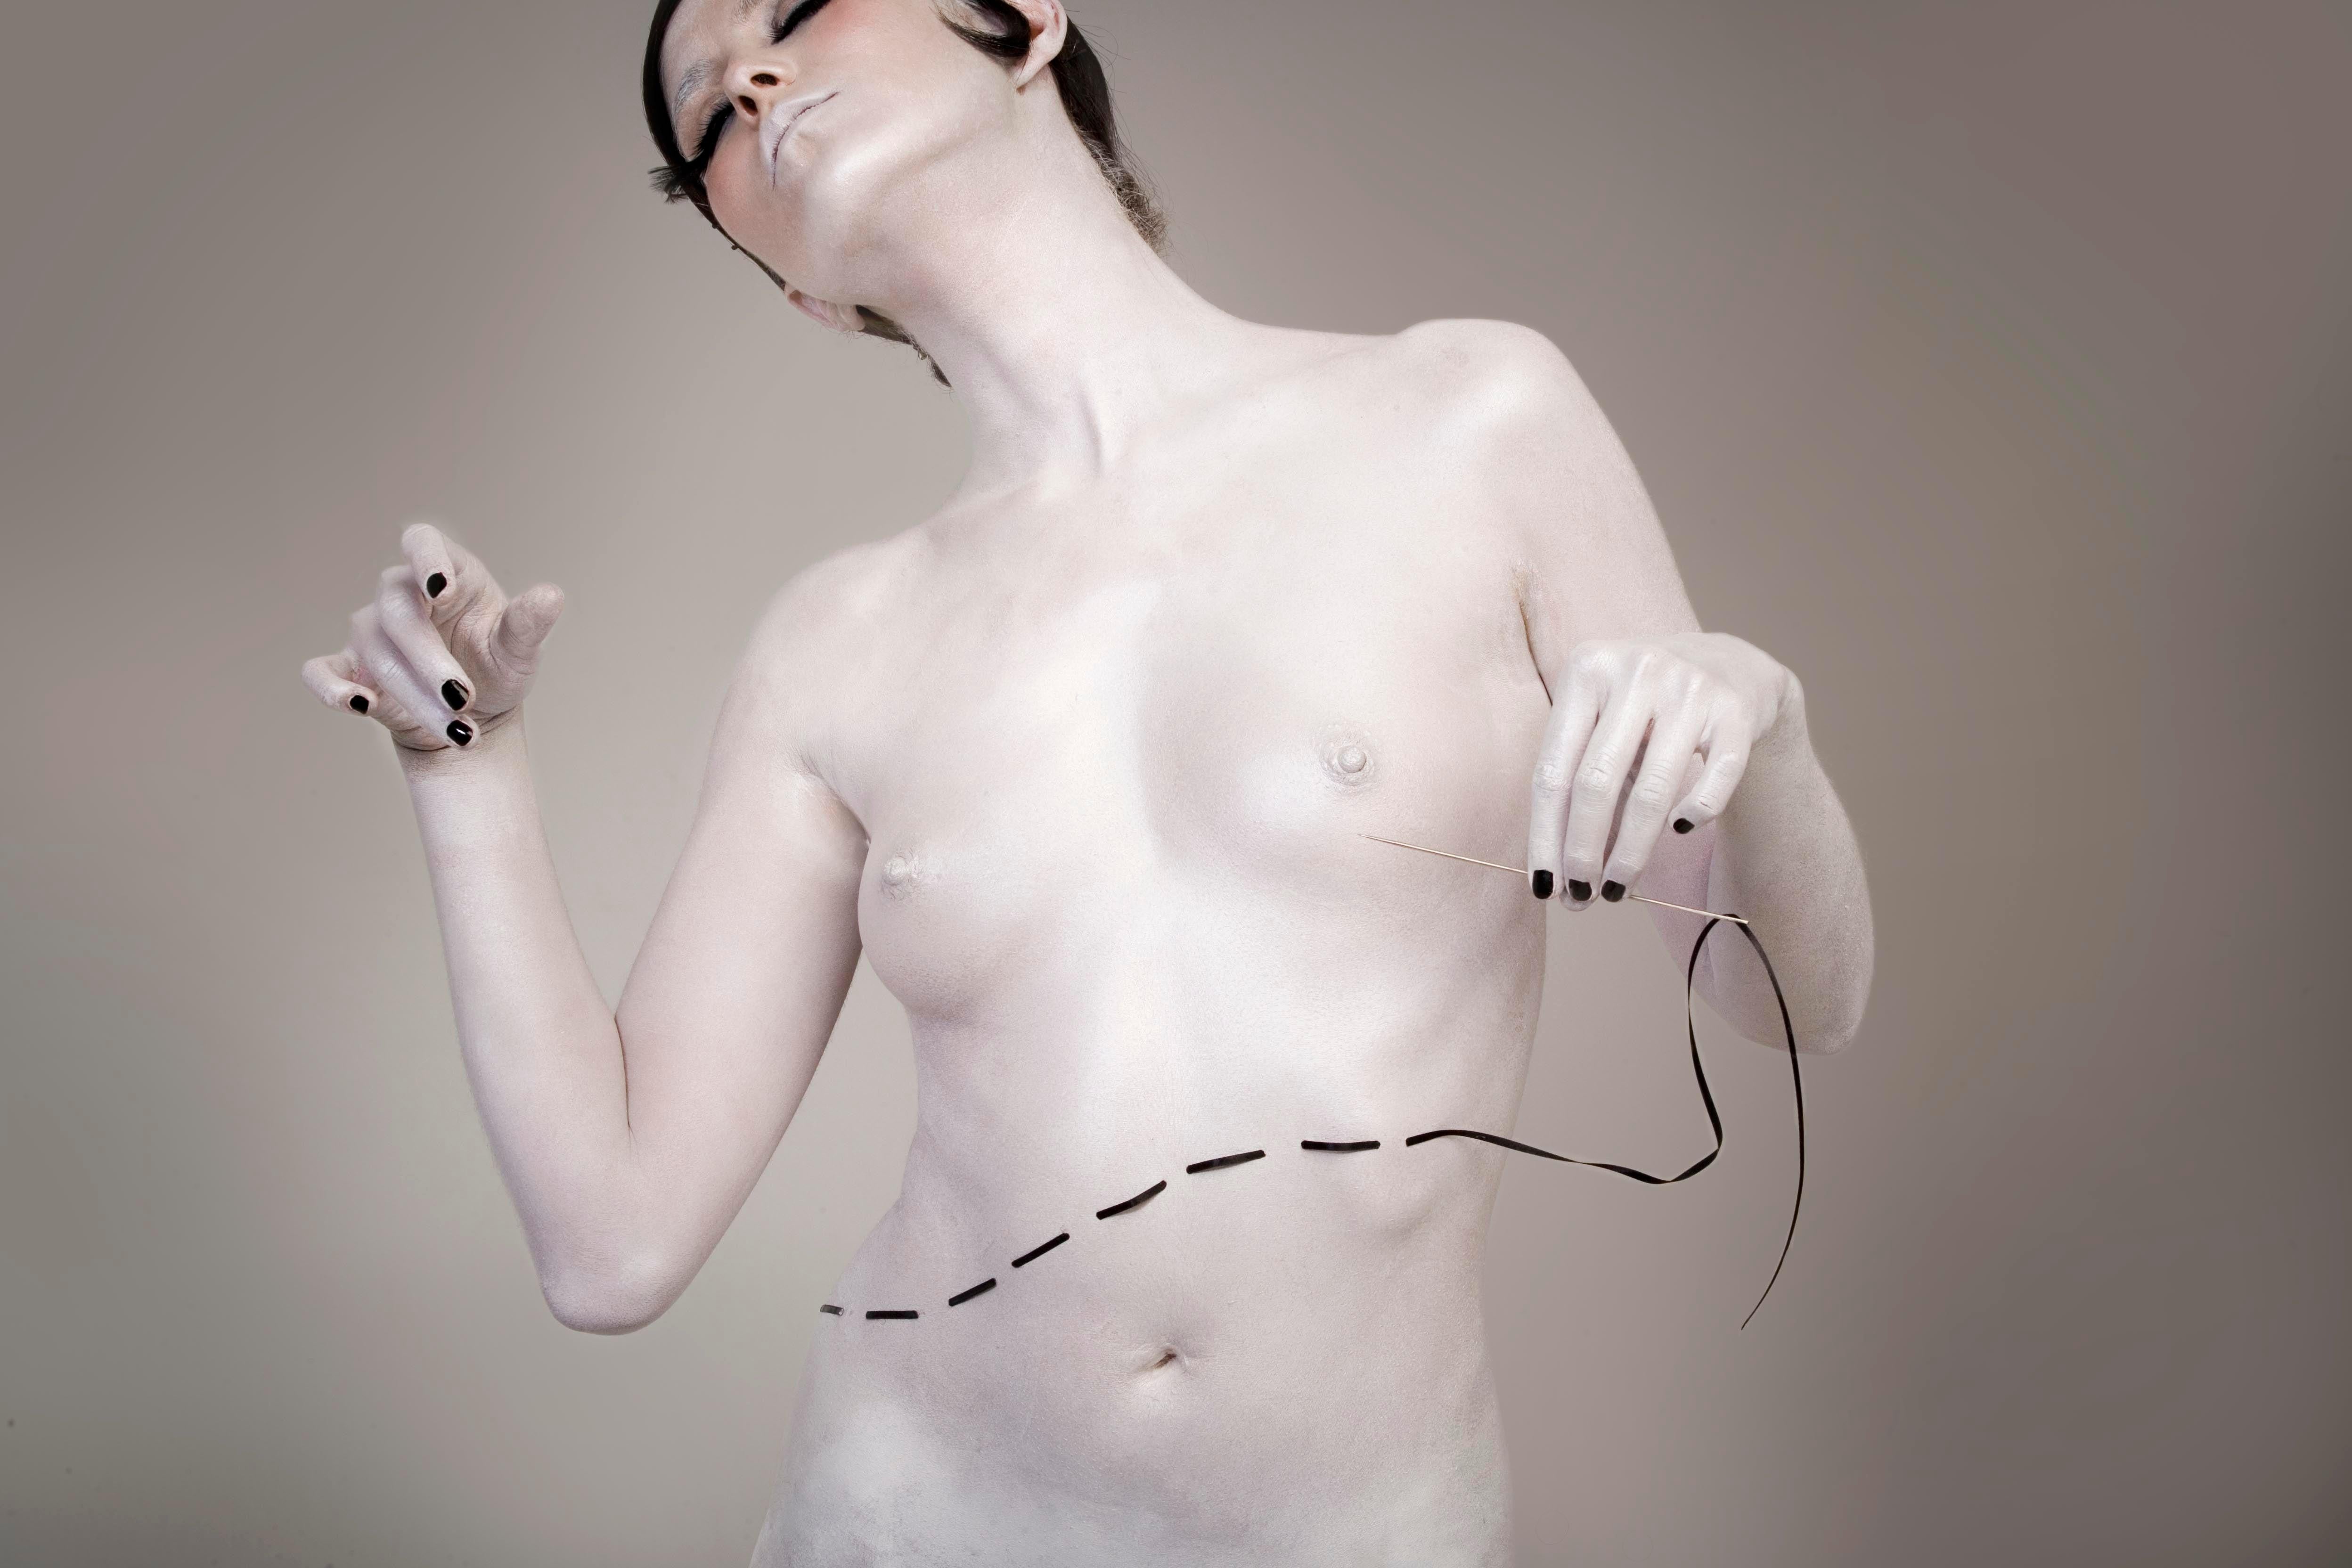  Diptych From the  'Beauty and Fantasy' series. Nude Color photograph - Photograph by Mauricio Velez